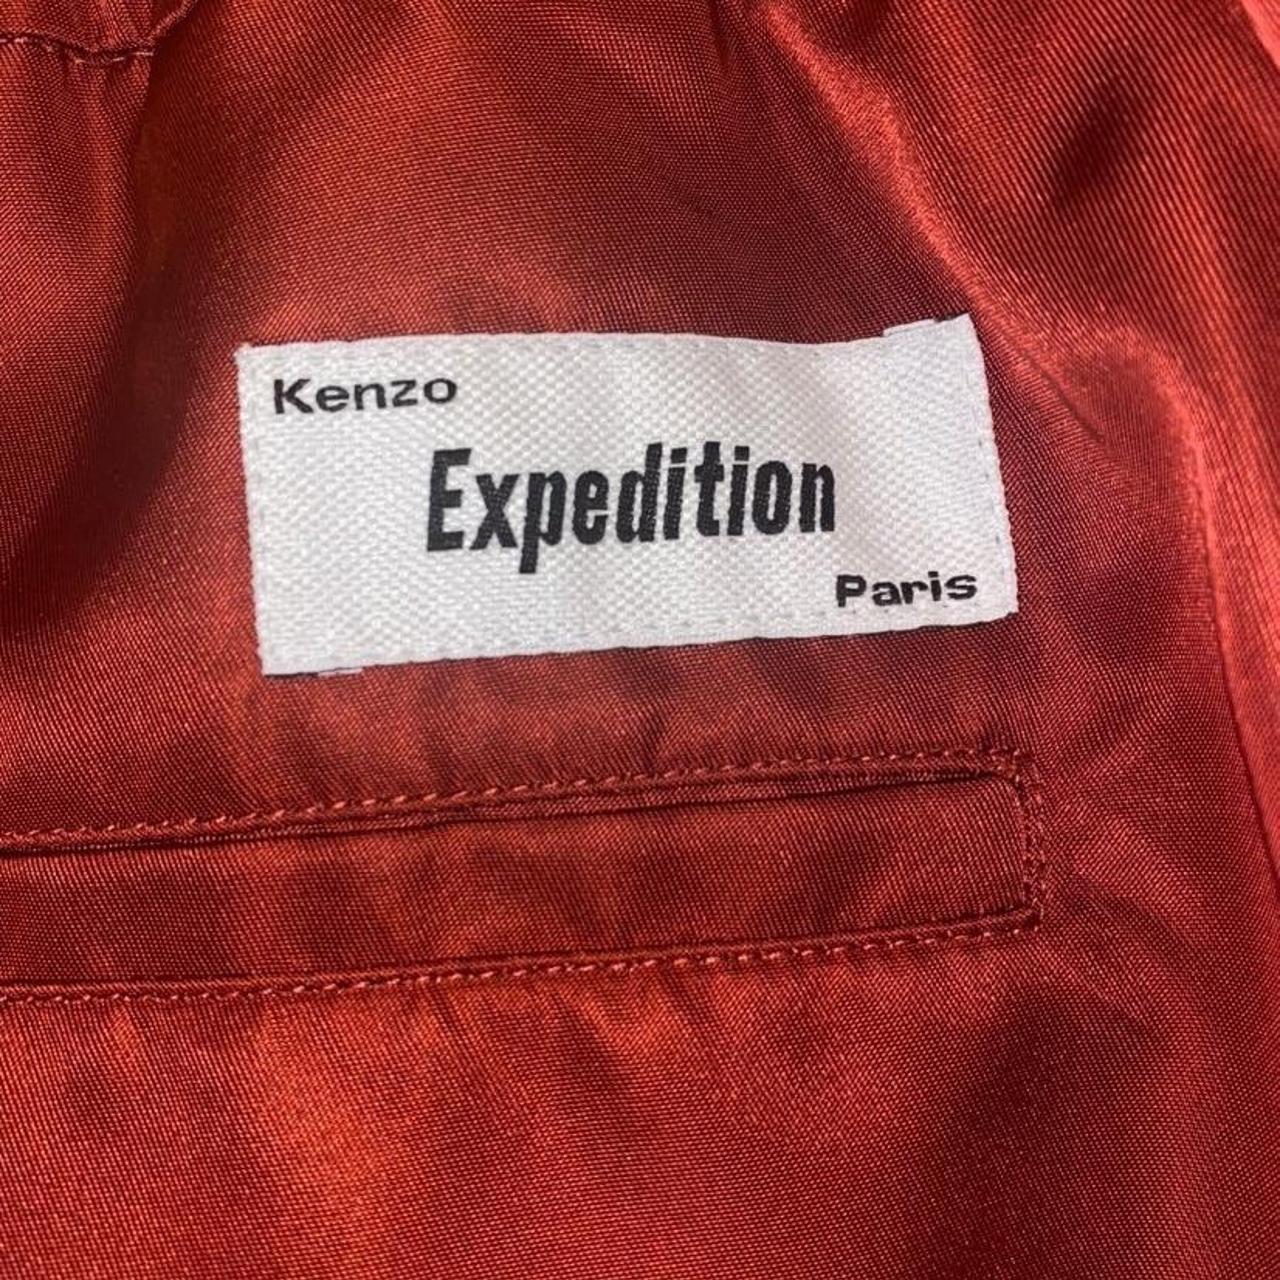 Kenzo Expedition Cargo Pants In Burgundy Red and... - Depop